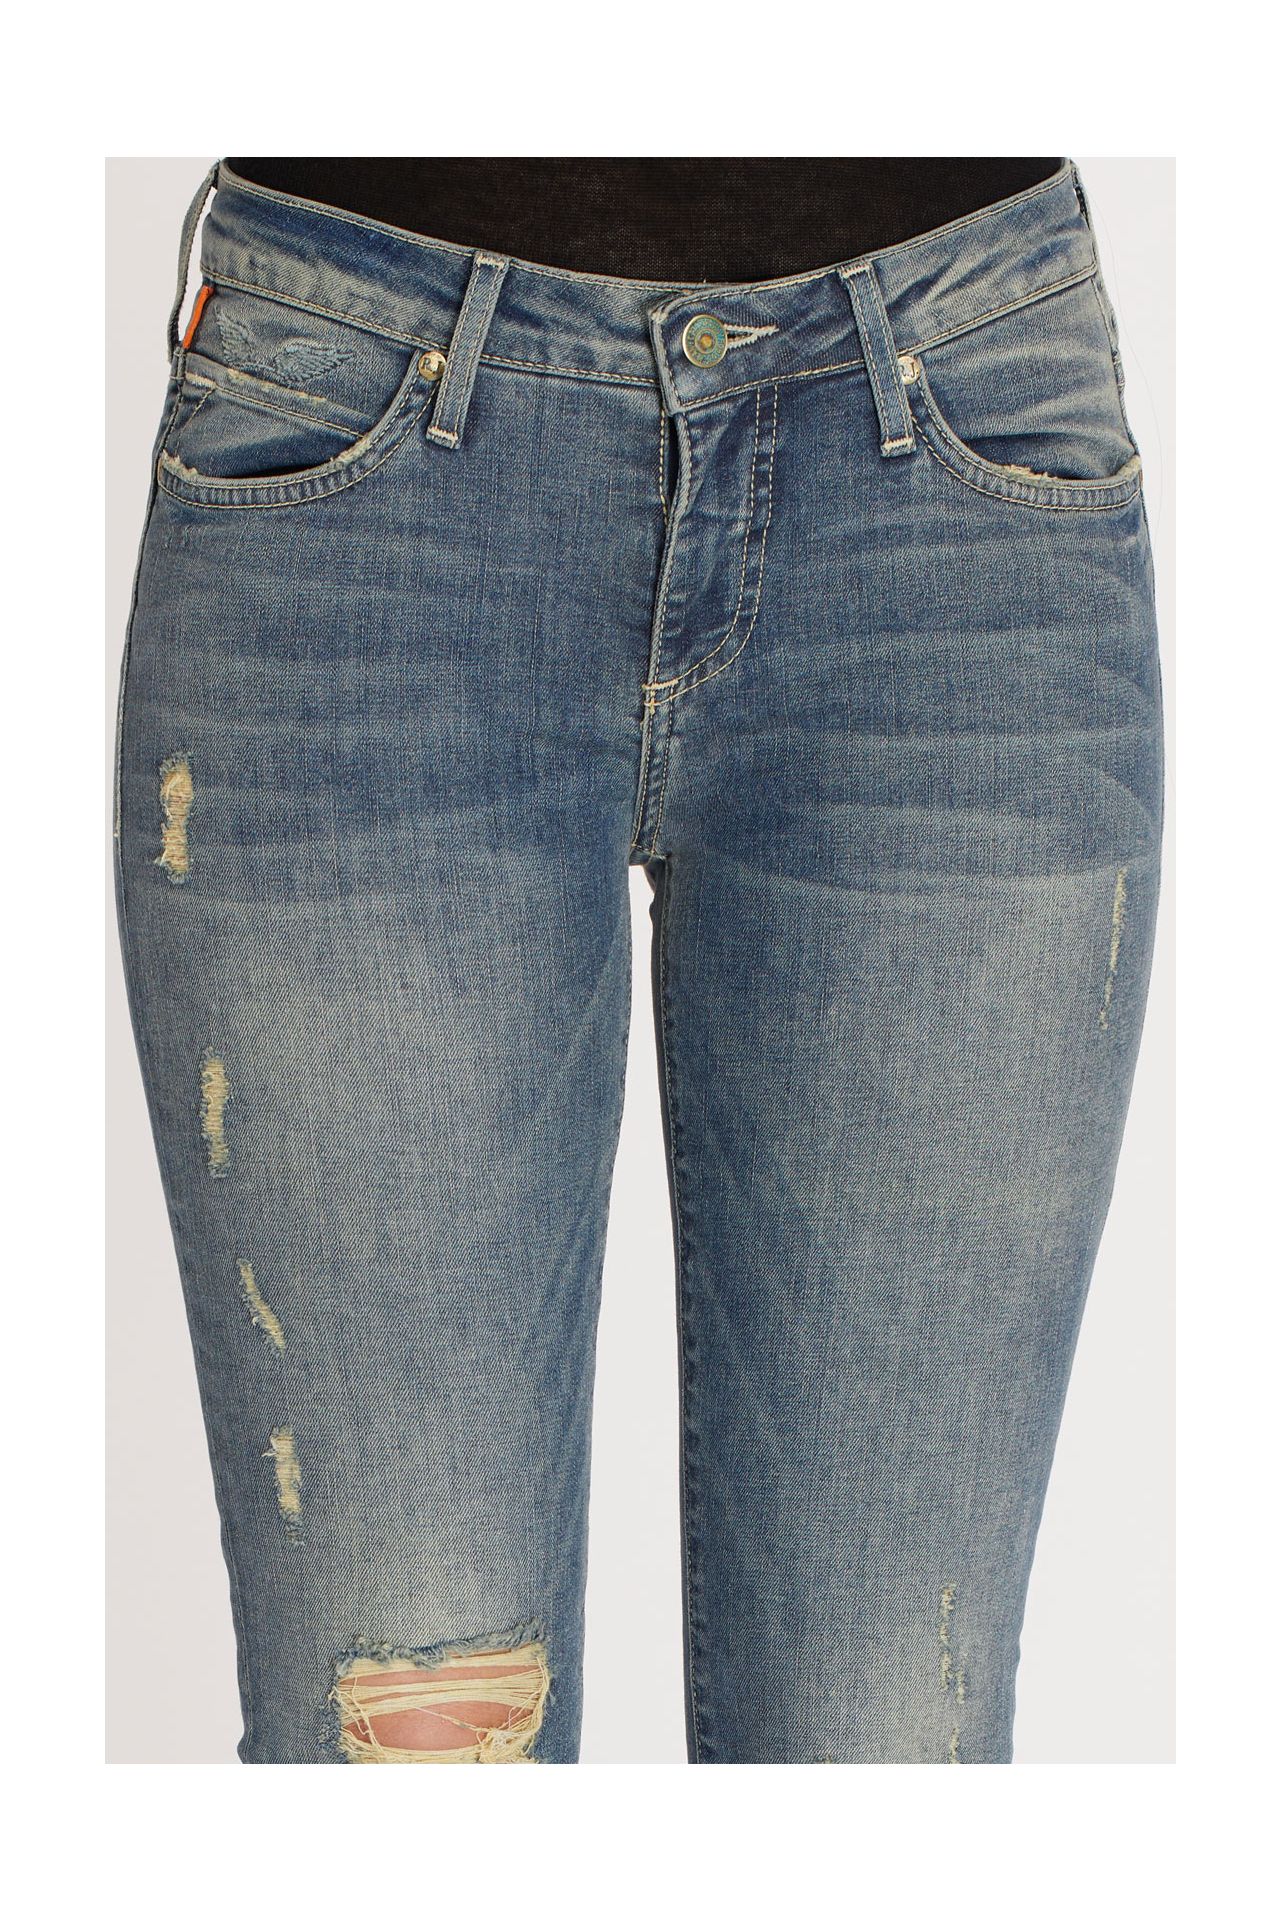 MIDRISE WOMENS SKINNY JEANS IN RIPPED BLUE WASH